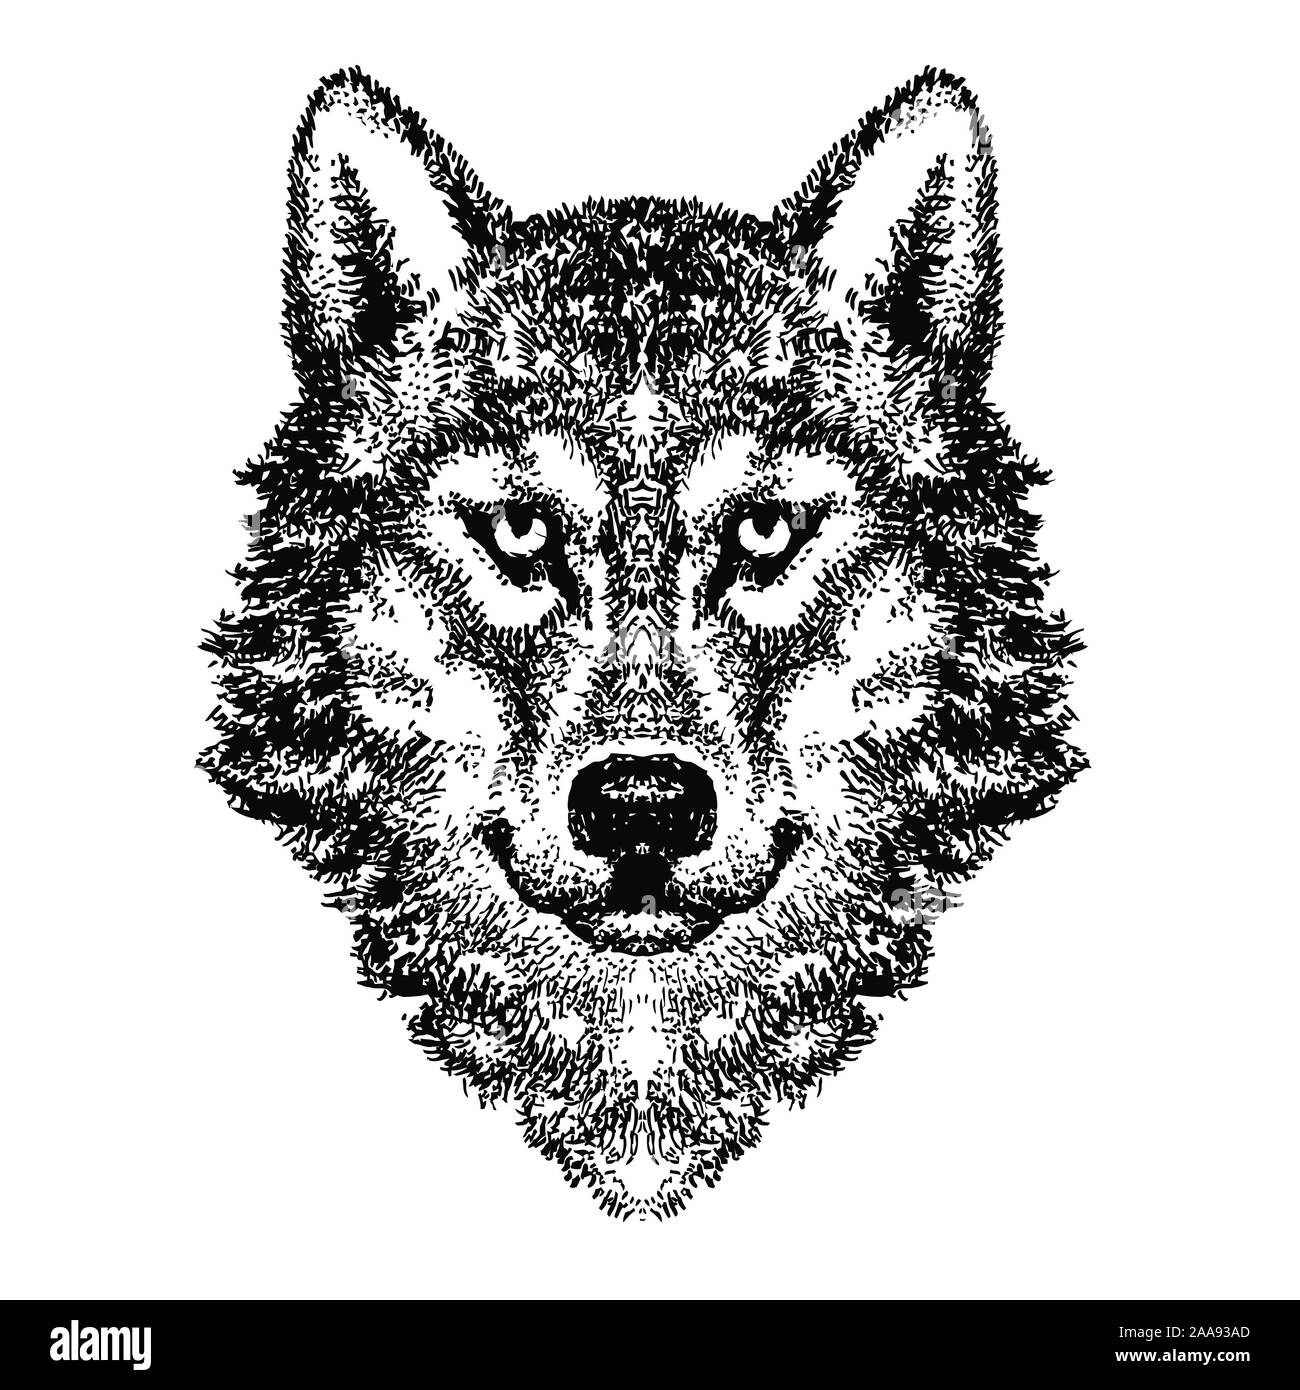 wolf pictures black and white